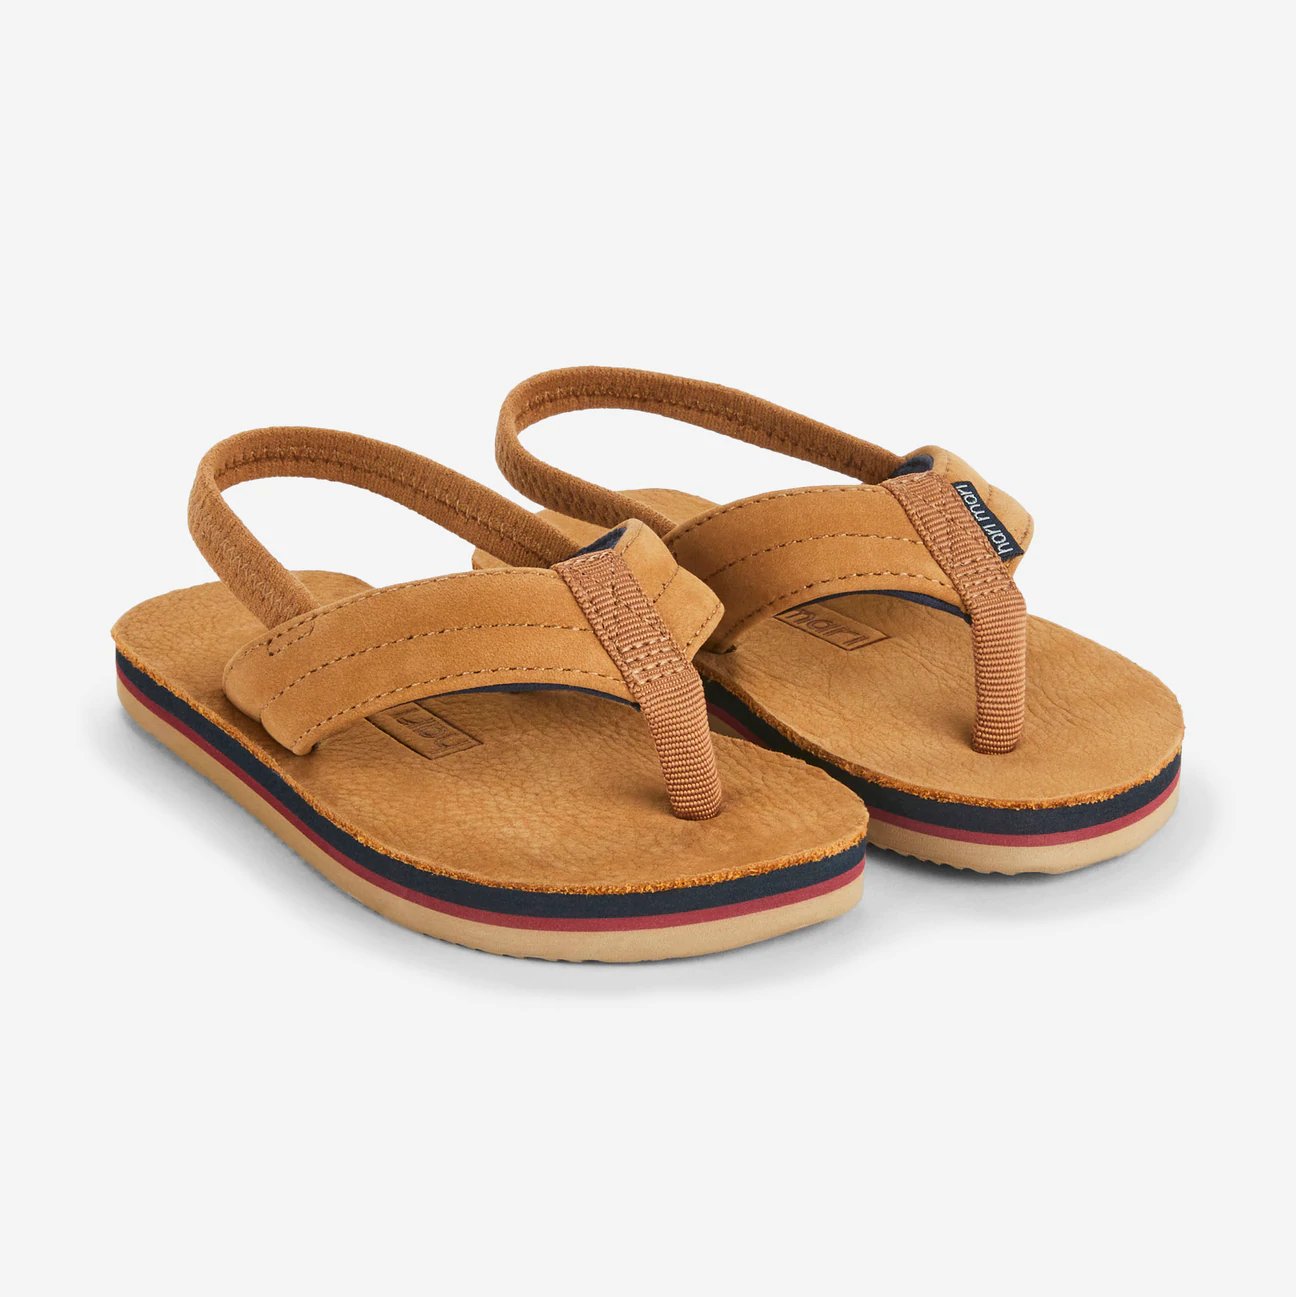 a pair of sandals with straps